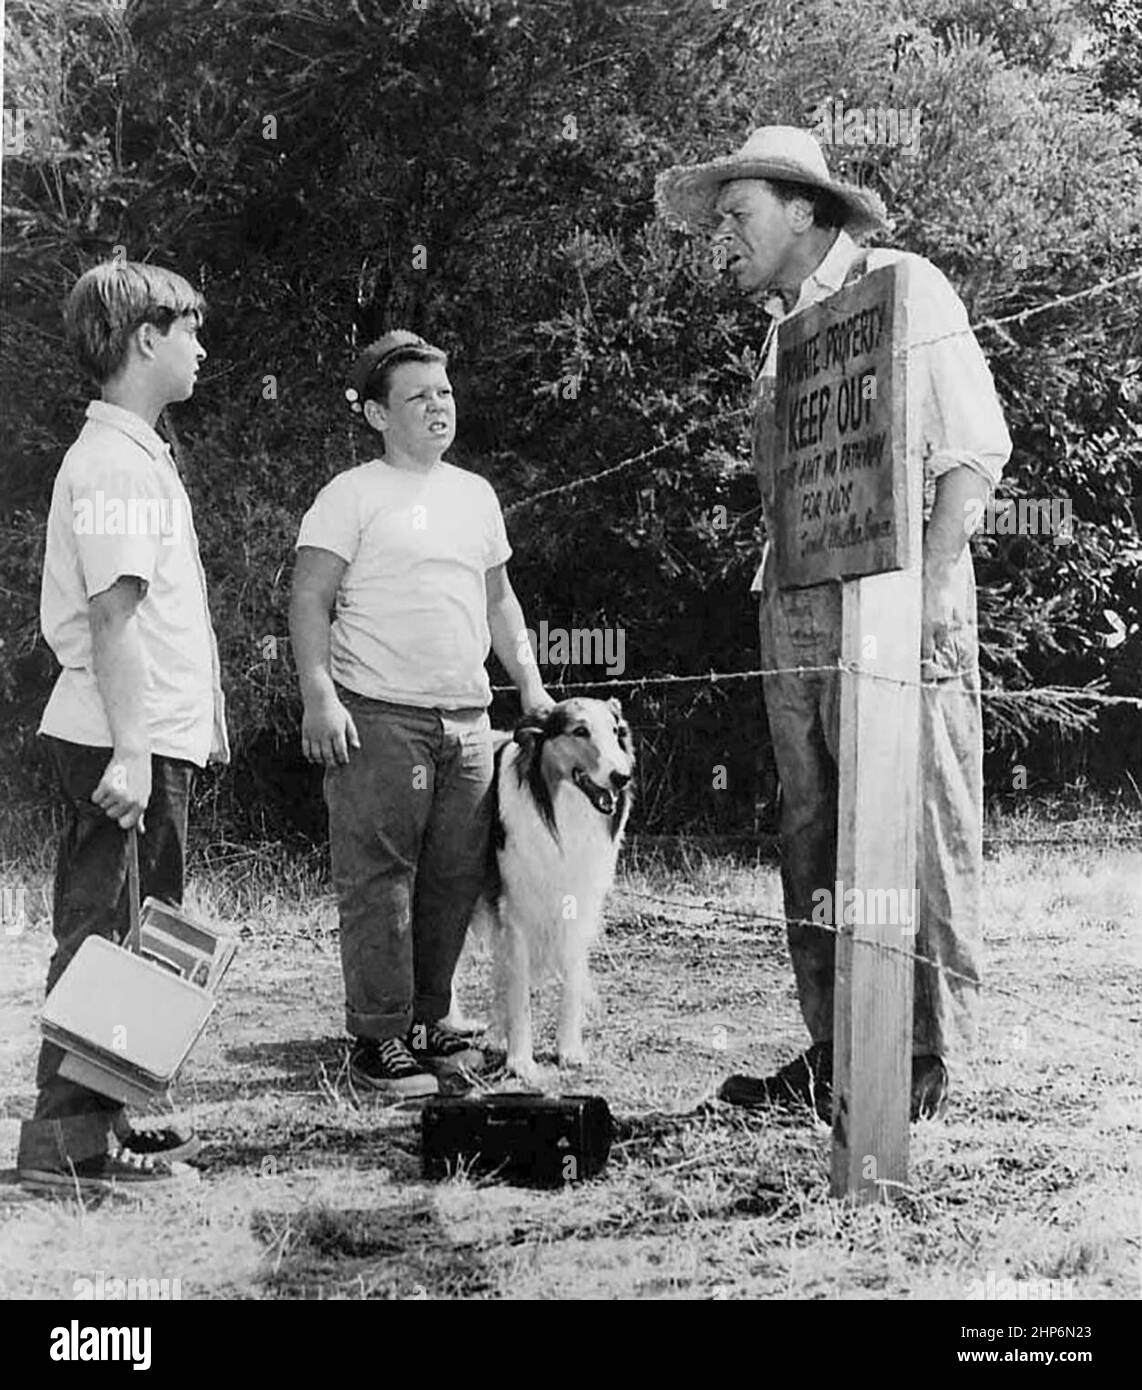 Scene from the television program Lassie. Jeff (Tommy Rettig, left) and Porky (Donald Keeler - Real name is Joey D. Vieira) are told by a land owner (Otto Waldis) to keep off his property. 7 September 1956 Stock Photo